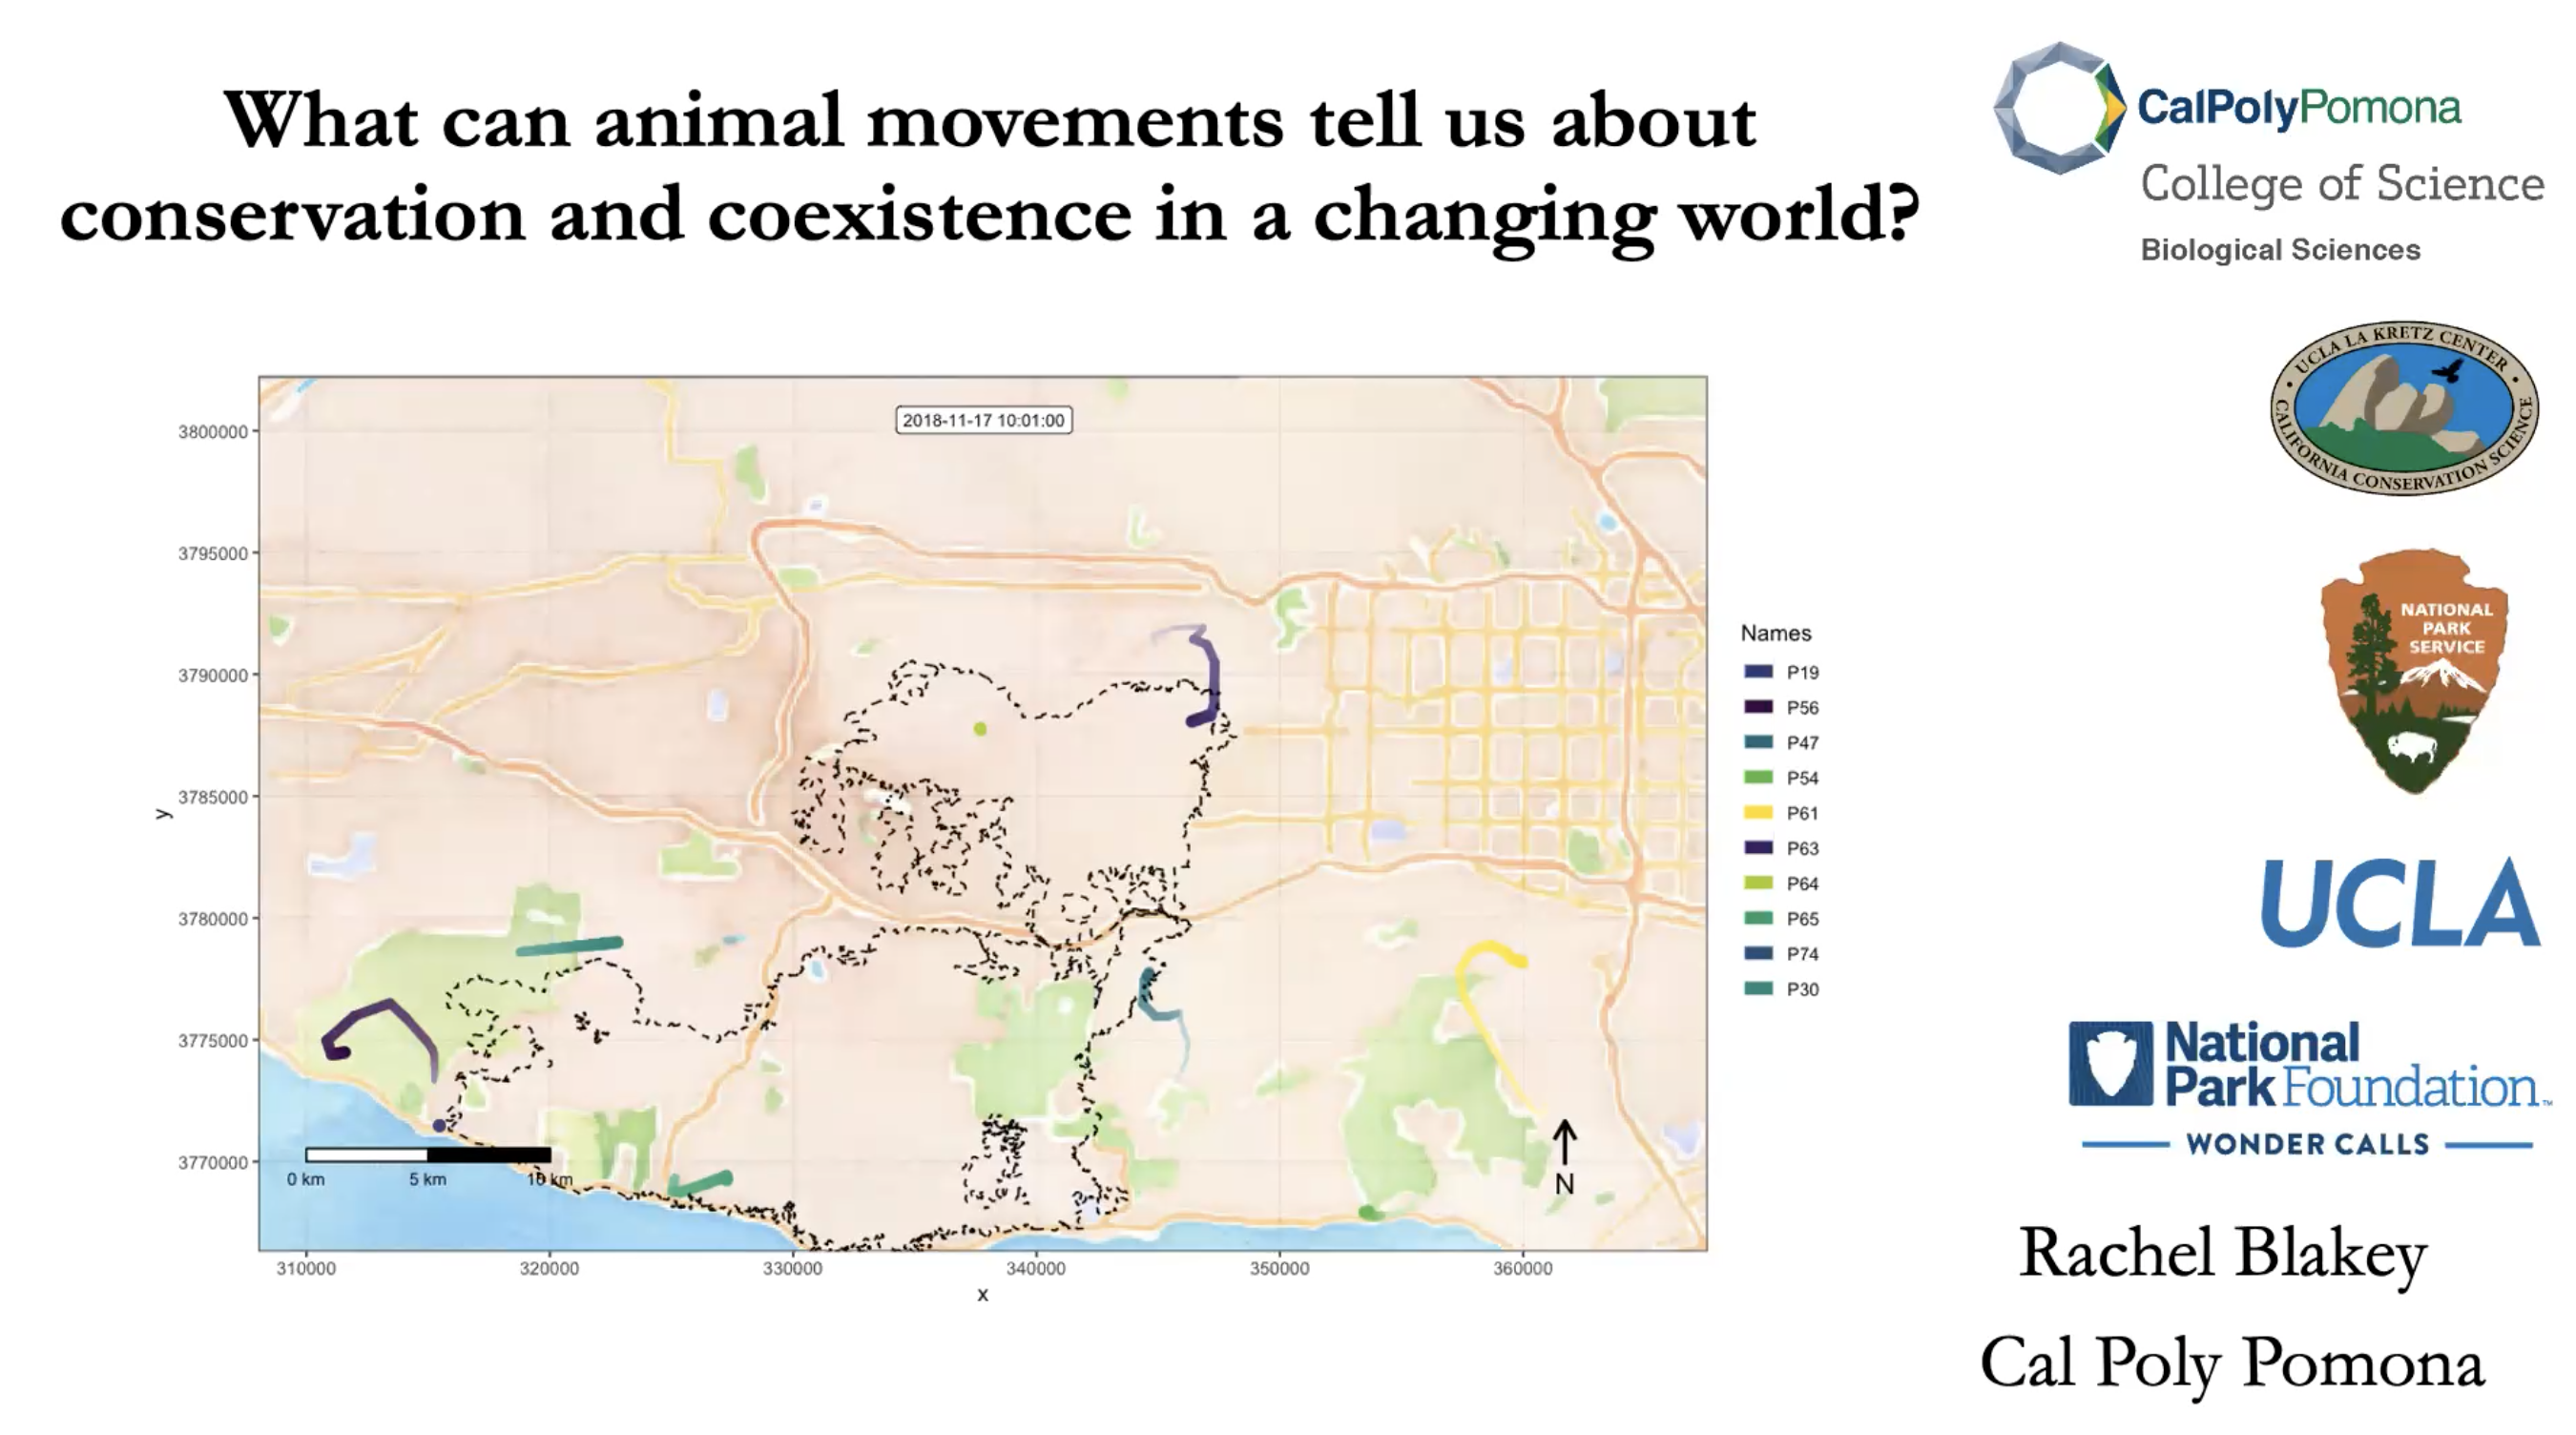 What Can Animal Movements Tell Us About Conservation and Coexistence in a Changing World?